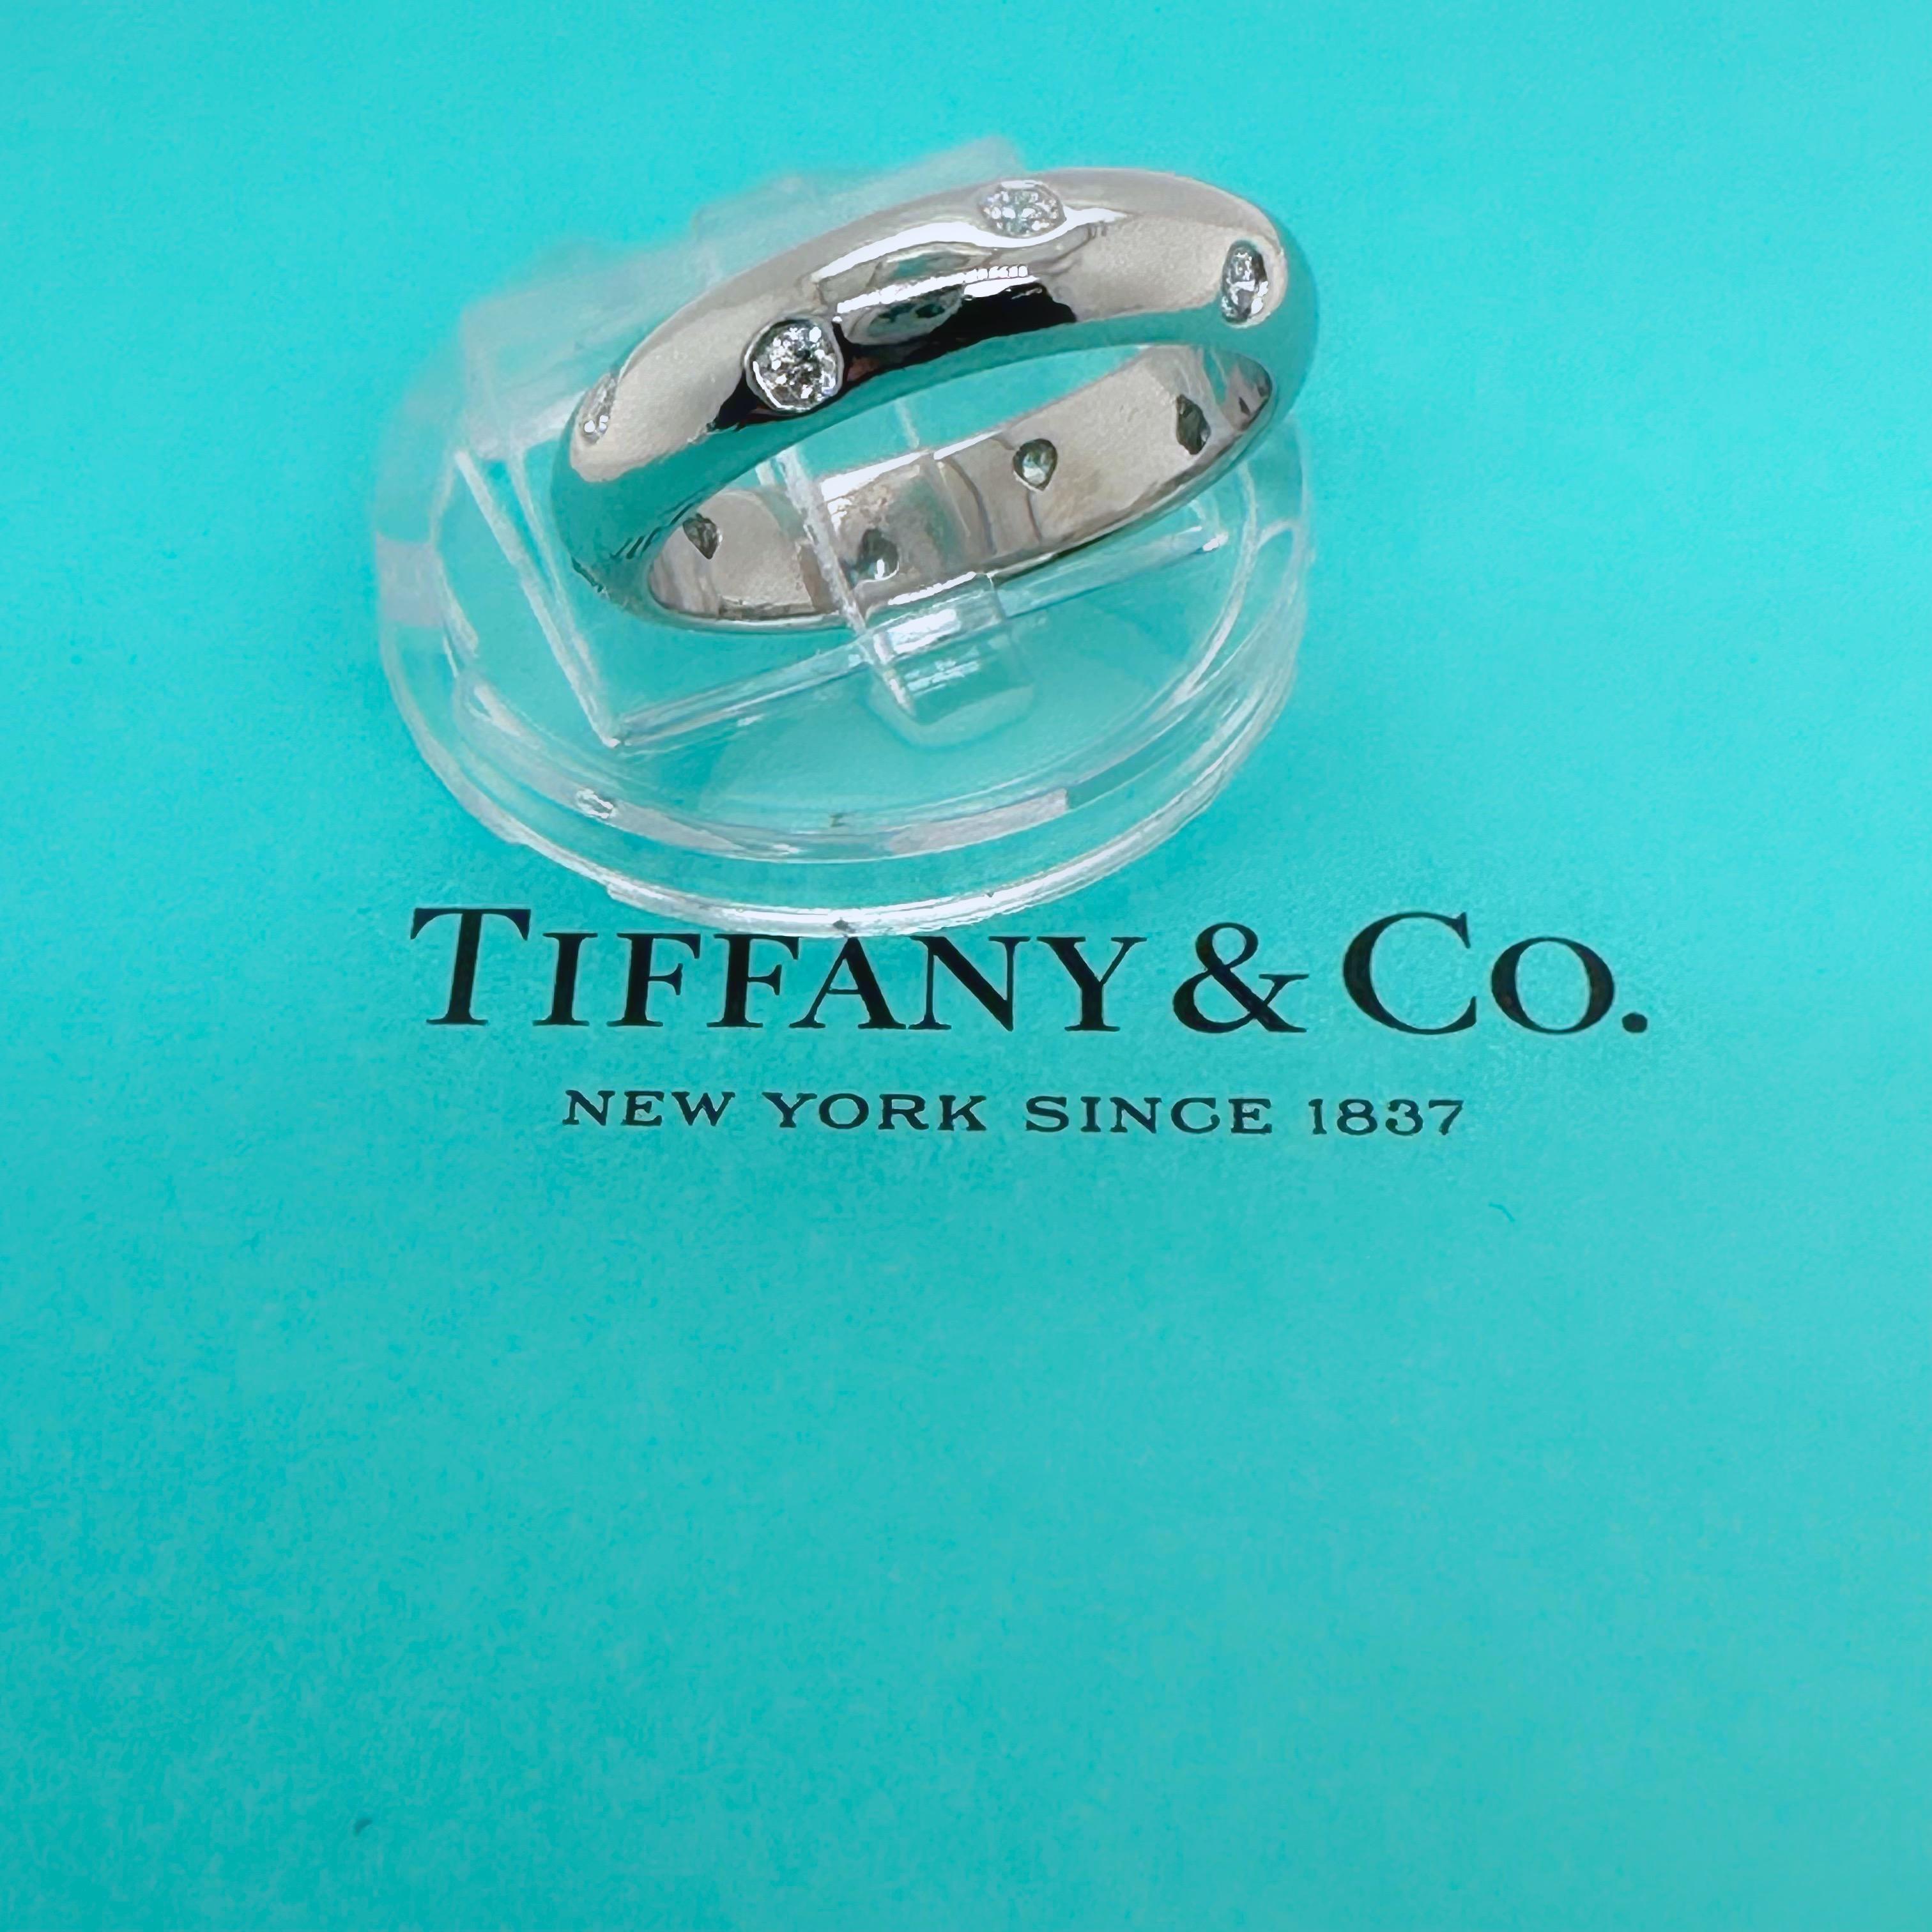 Tiffany & Co. ETOILE Diamond Band Ring 
Style:  Band
Ref. number:  60004786
Metal:  Platinum PT950
Size:  5.75
Measurements:  4.3 mm
TCW:  0.22 tcw
Main Diamond:  10 Round Brilliant Diamonds
Hallmark:  ©T&CO. PT950
Includes:  T&C Jewelry Pouch -